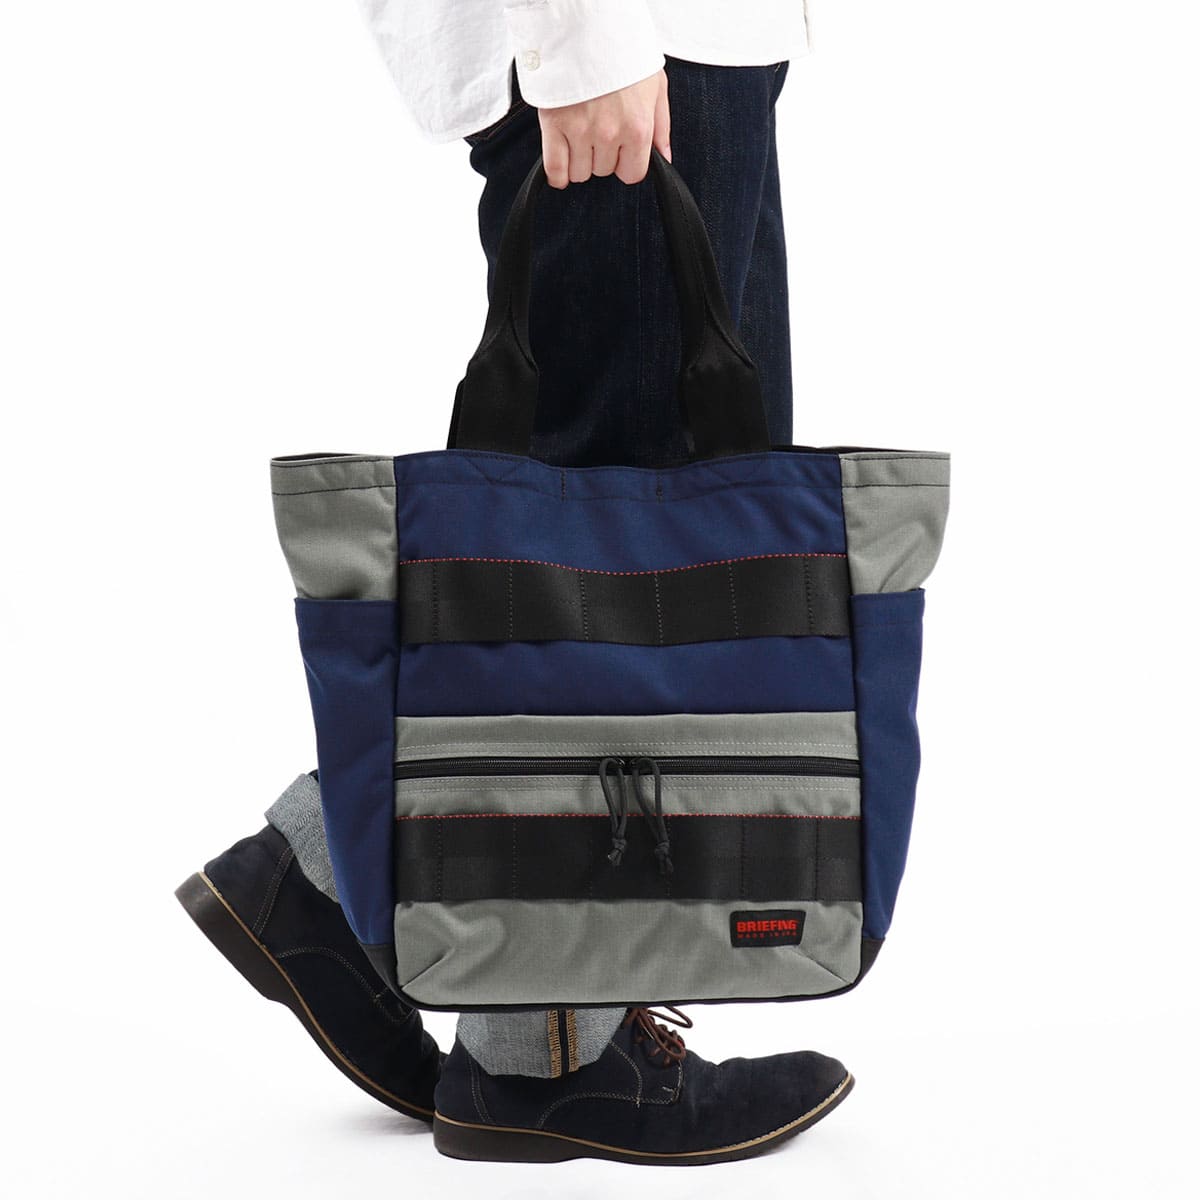 BRIEFING ブリーフィング URBAN BUCKET TOTE トートお探しの方は是非